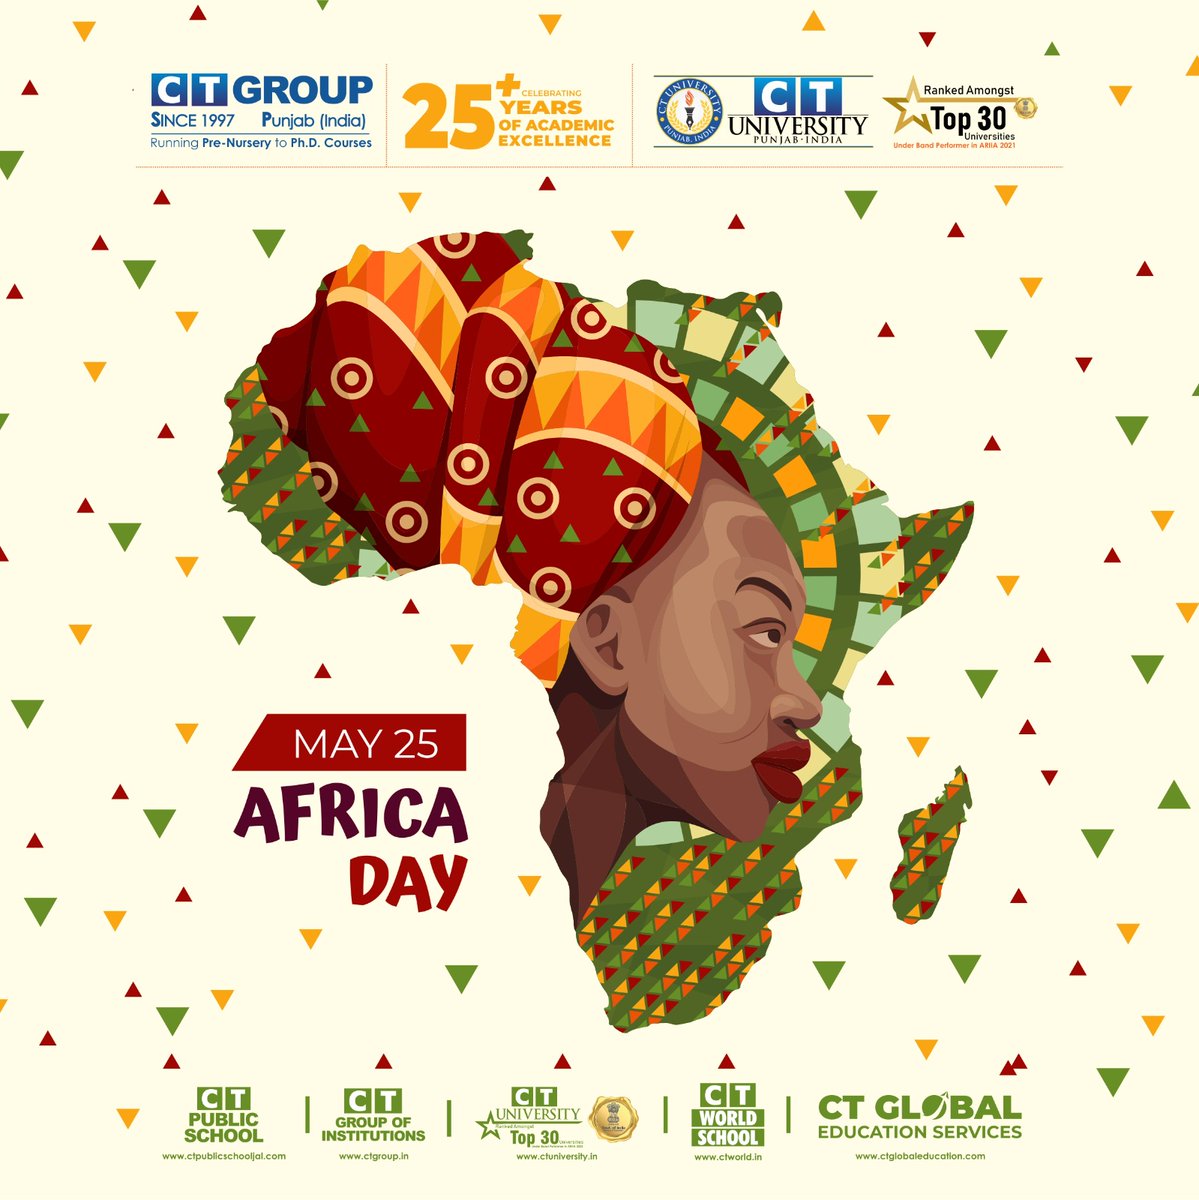 🌍 Celebrating Africa Day! 🌍
Today, we honor the diverse cultures, rich heritage, and remarkable achievements of the African continent.

Let's come together in unity and celebrate the vibrant spirit of Africa. 🎉✨
#AfricaDay #UnityInDiversity #AfricanHeritage #AfricanPride #CTU